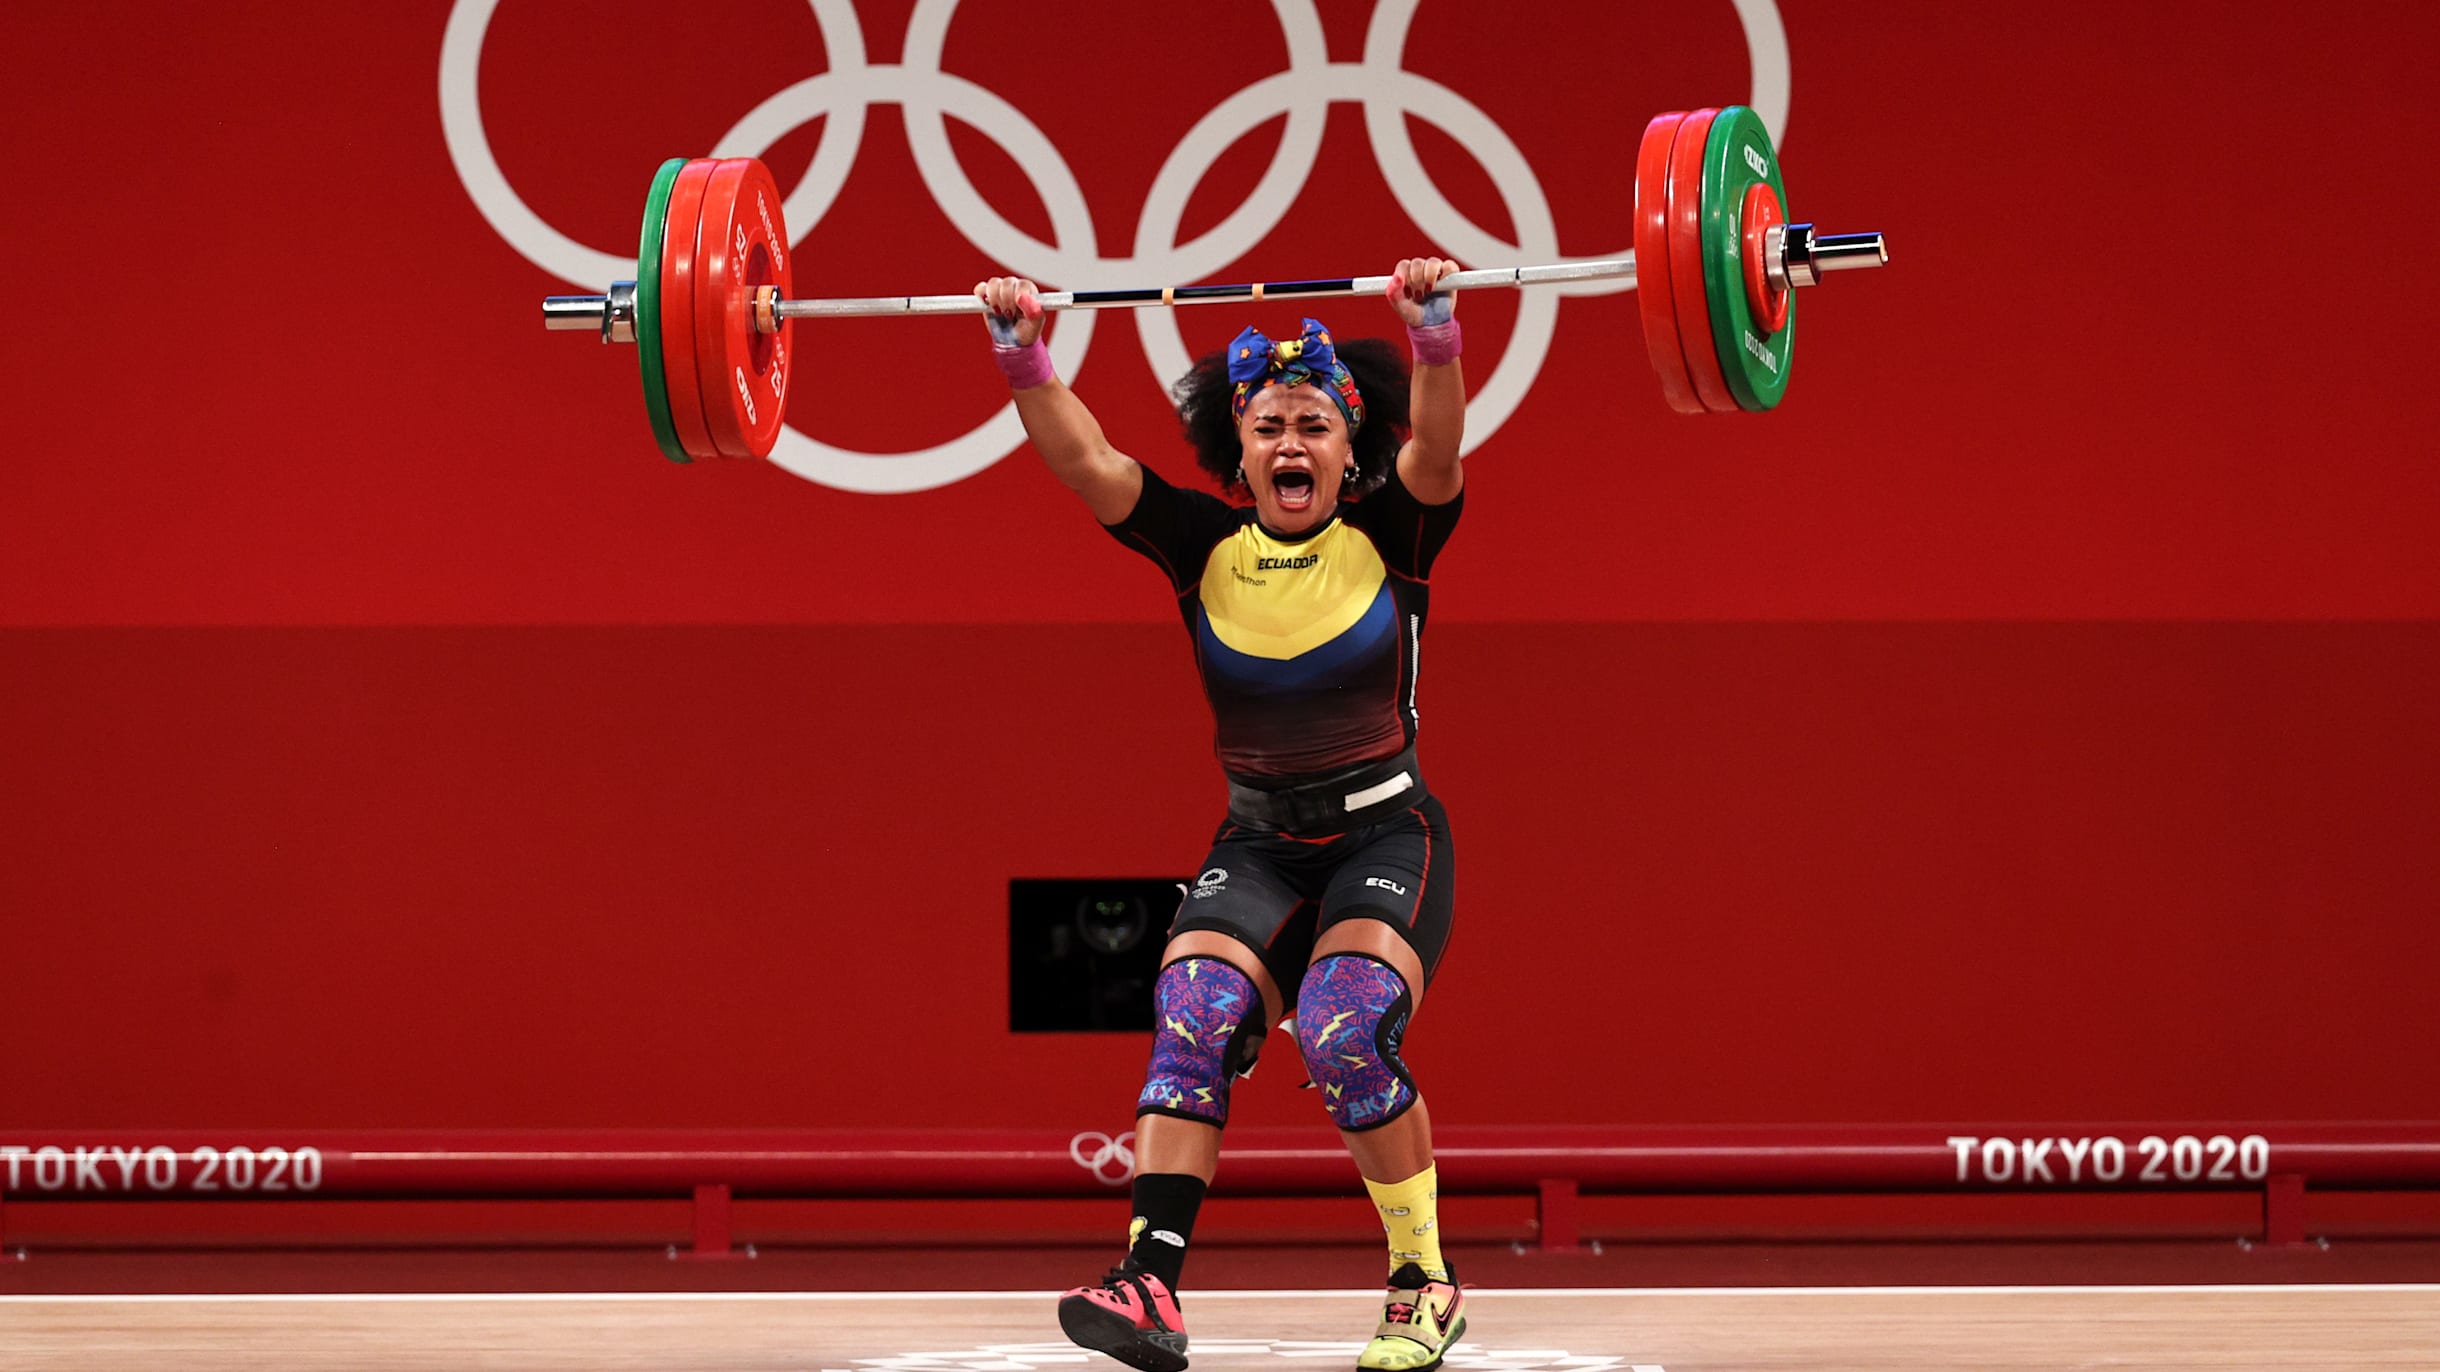 Olympic Weightlifting 101: Terminology & definitions